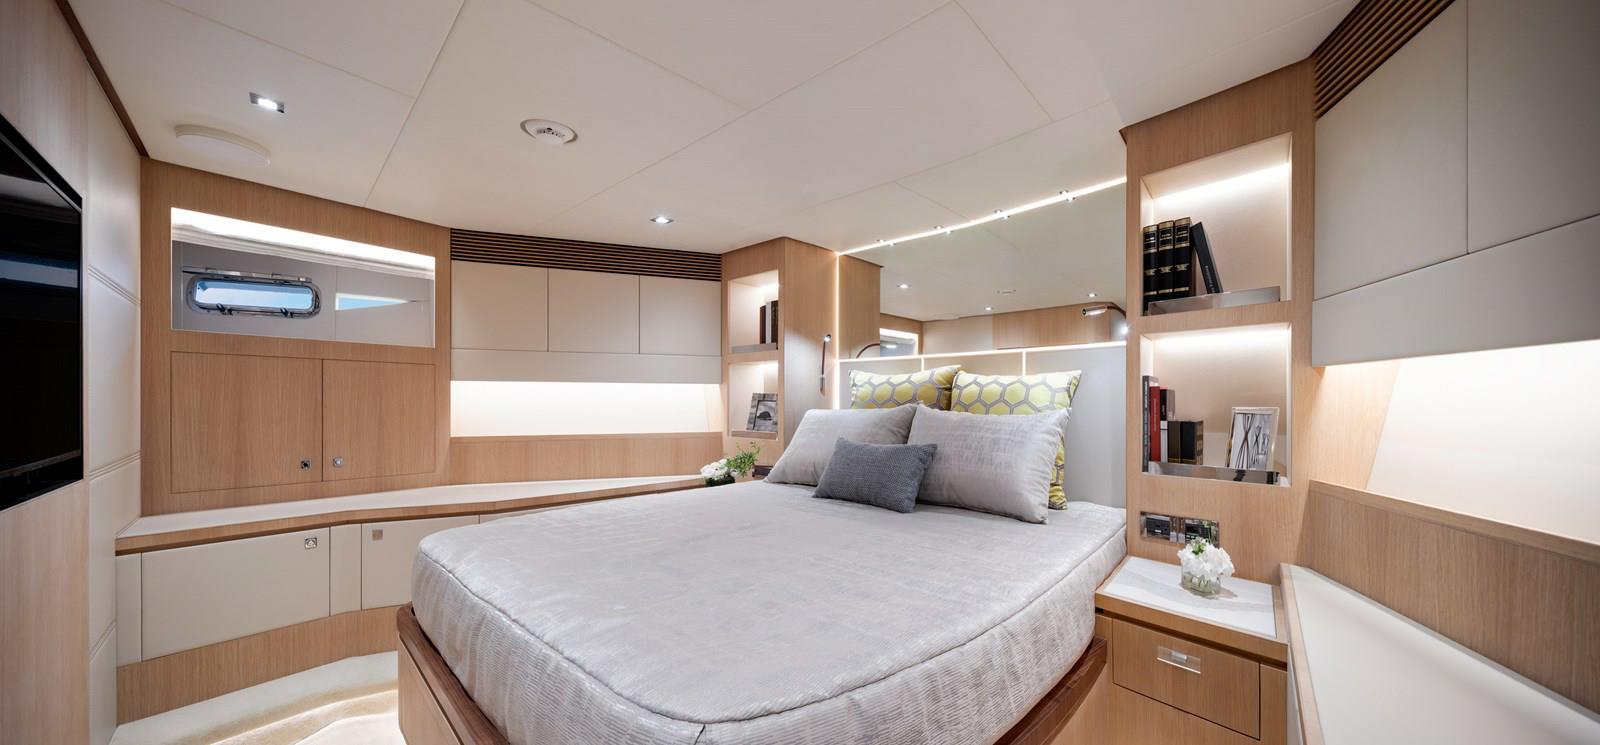 FD87 Aqua Life Bow VIP stateroom with queen bed, nightstands, bookshelves and TV.